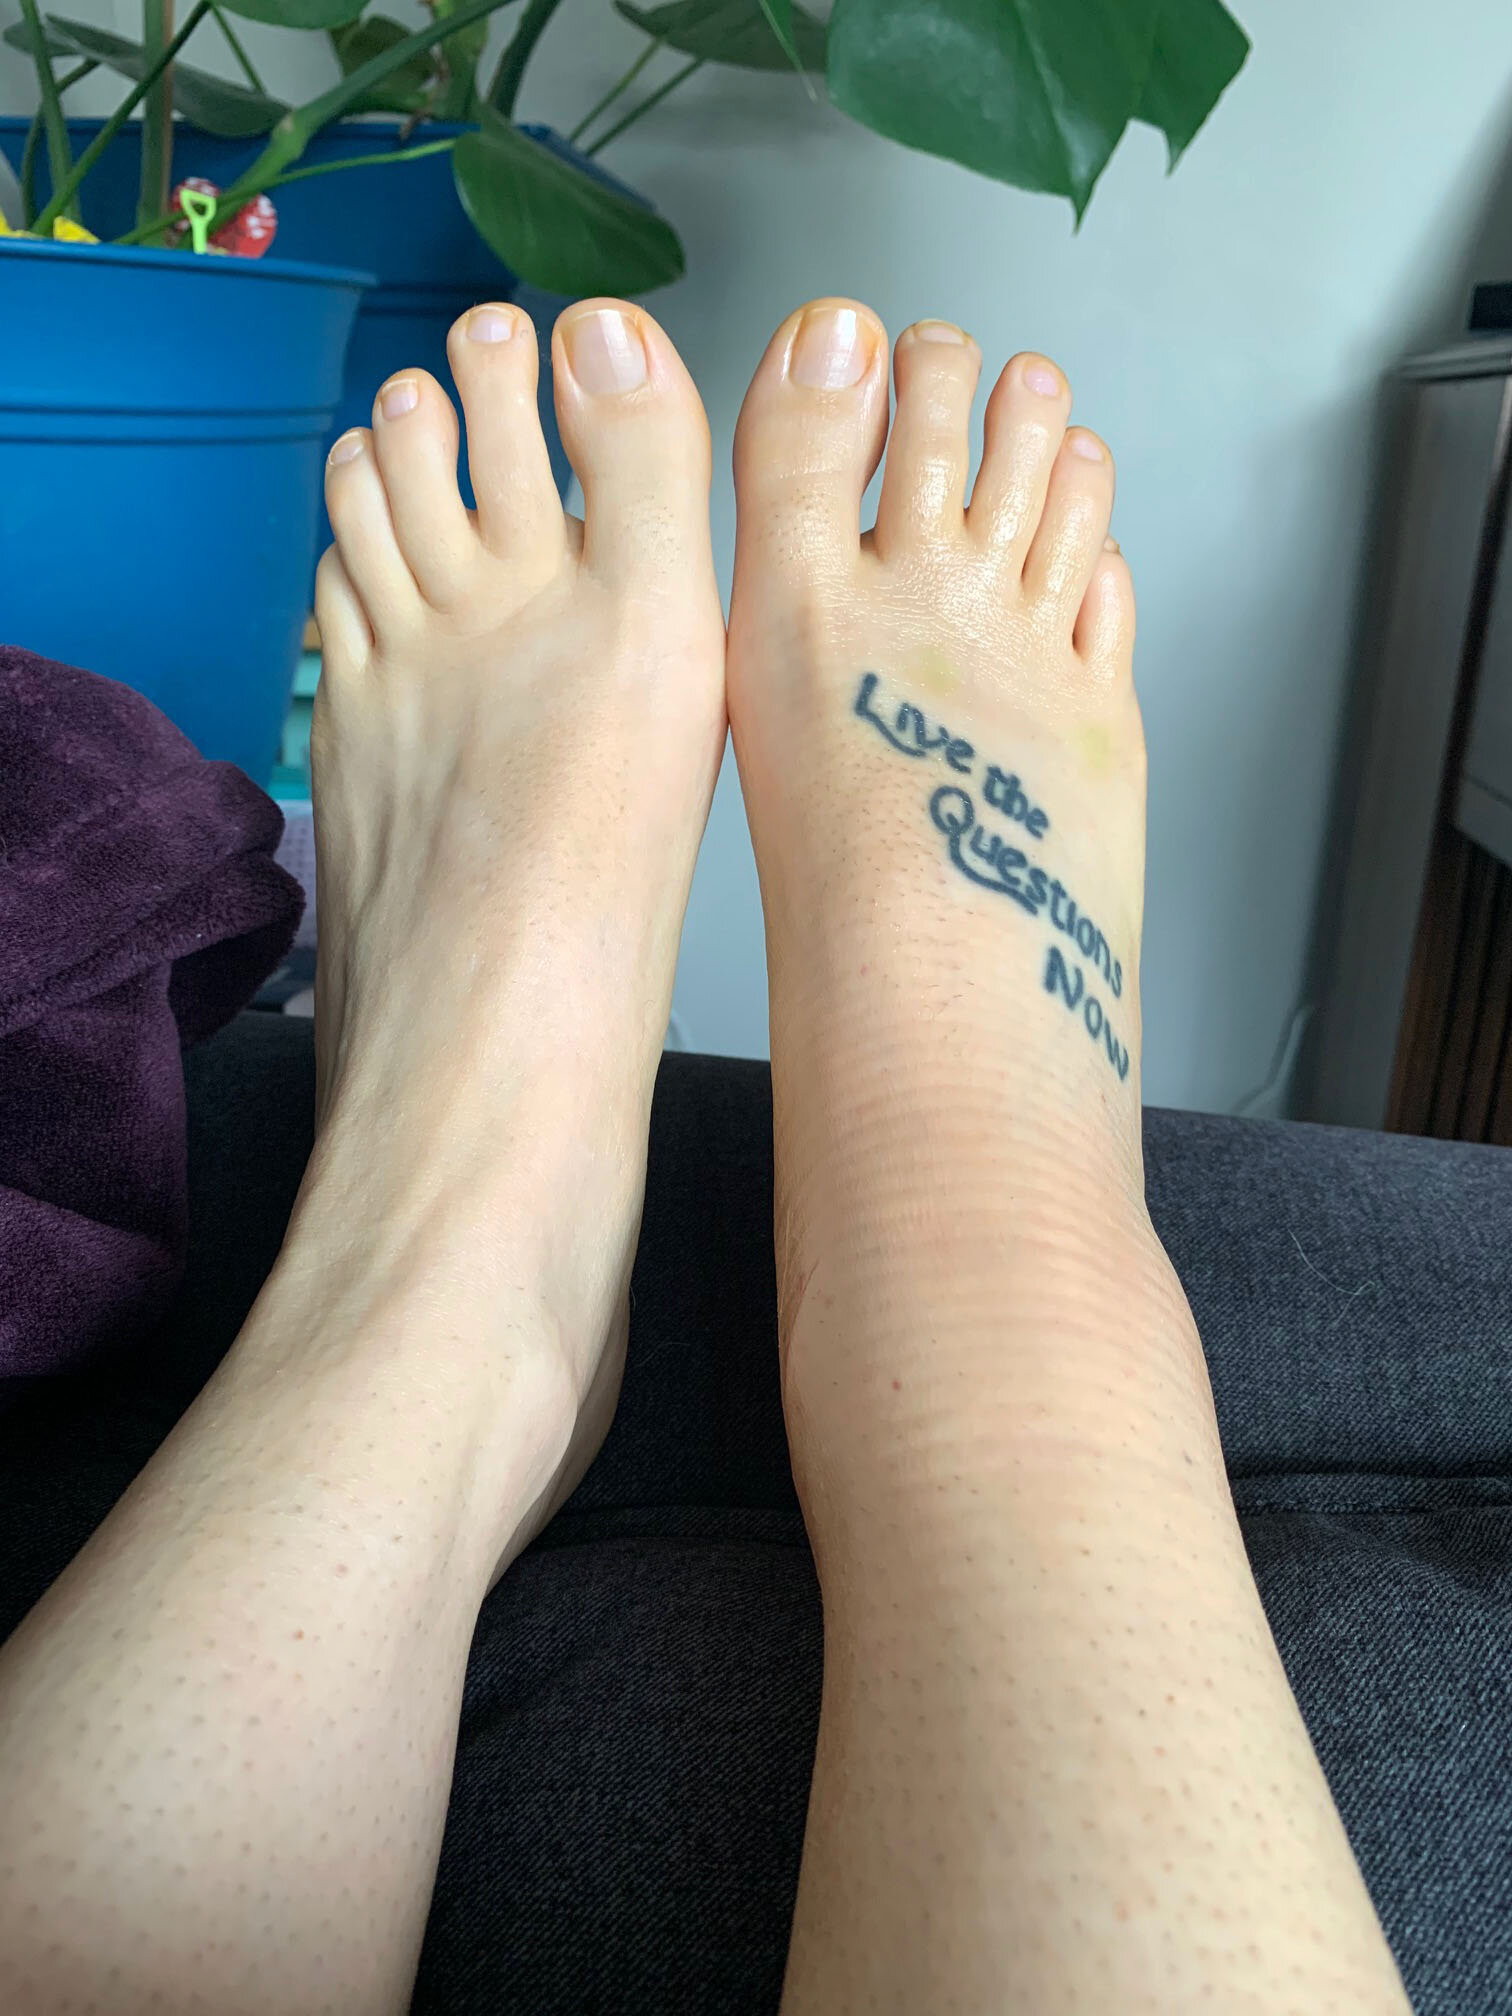 Ankle Fracture - leg comparison one month after surgery.jpg